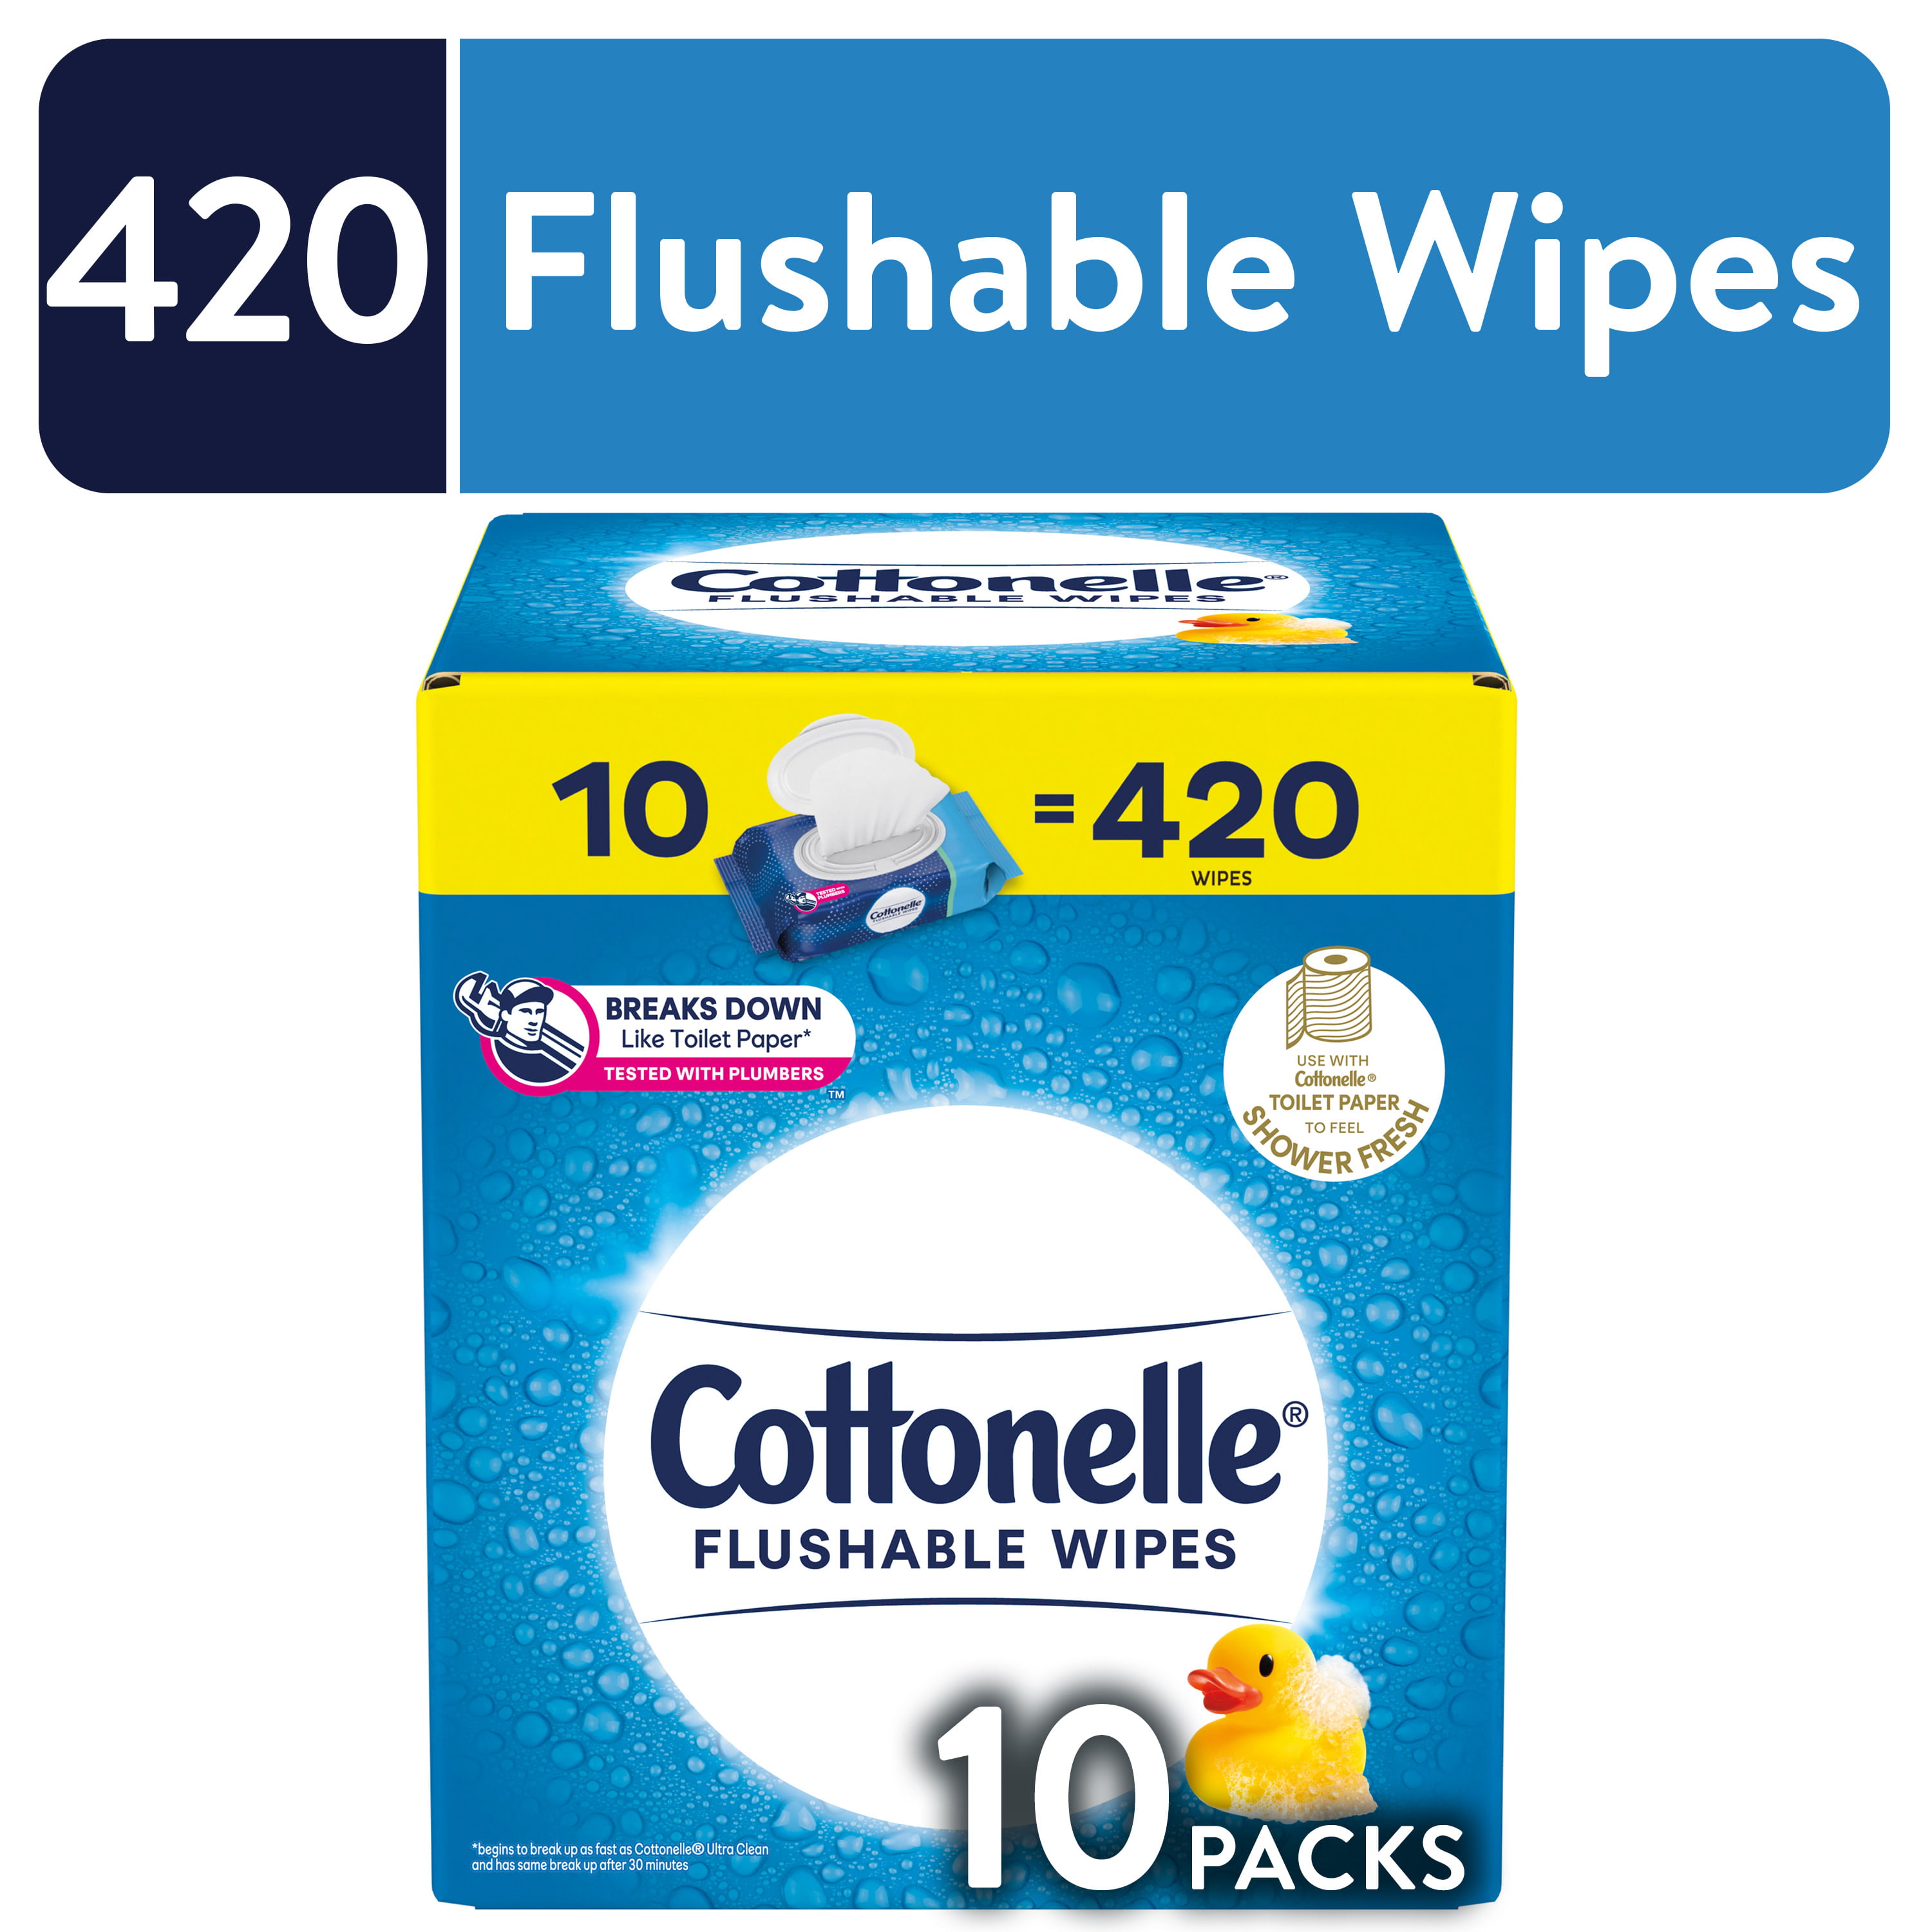 Cottonelle Flushable Wipes Free Shipping!! 504 ct. 